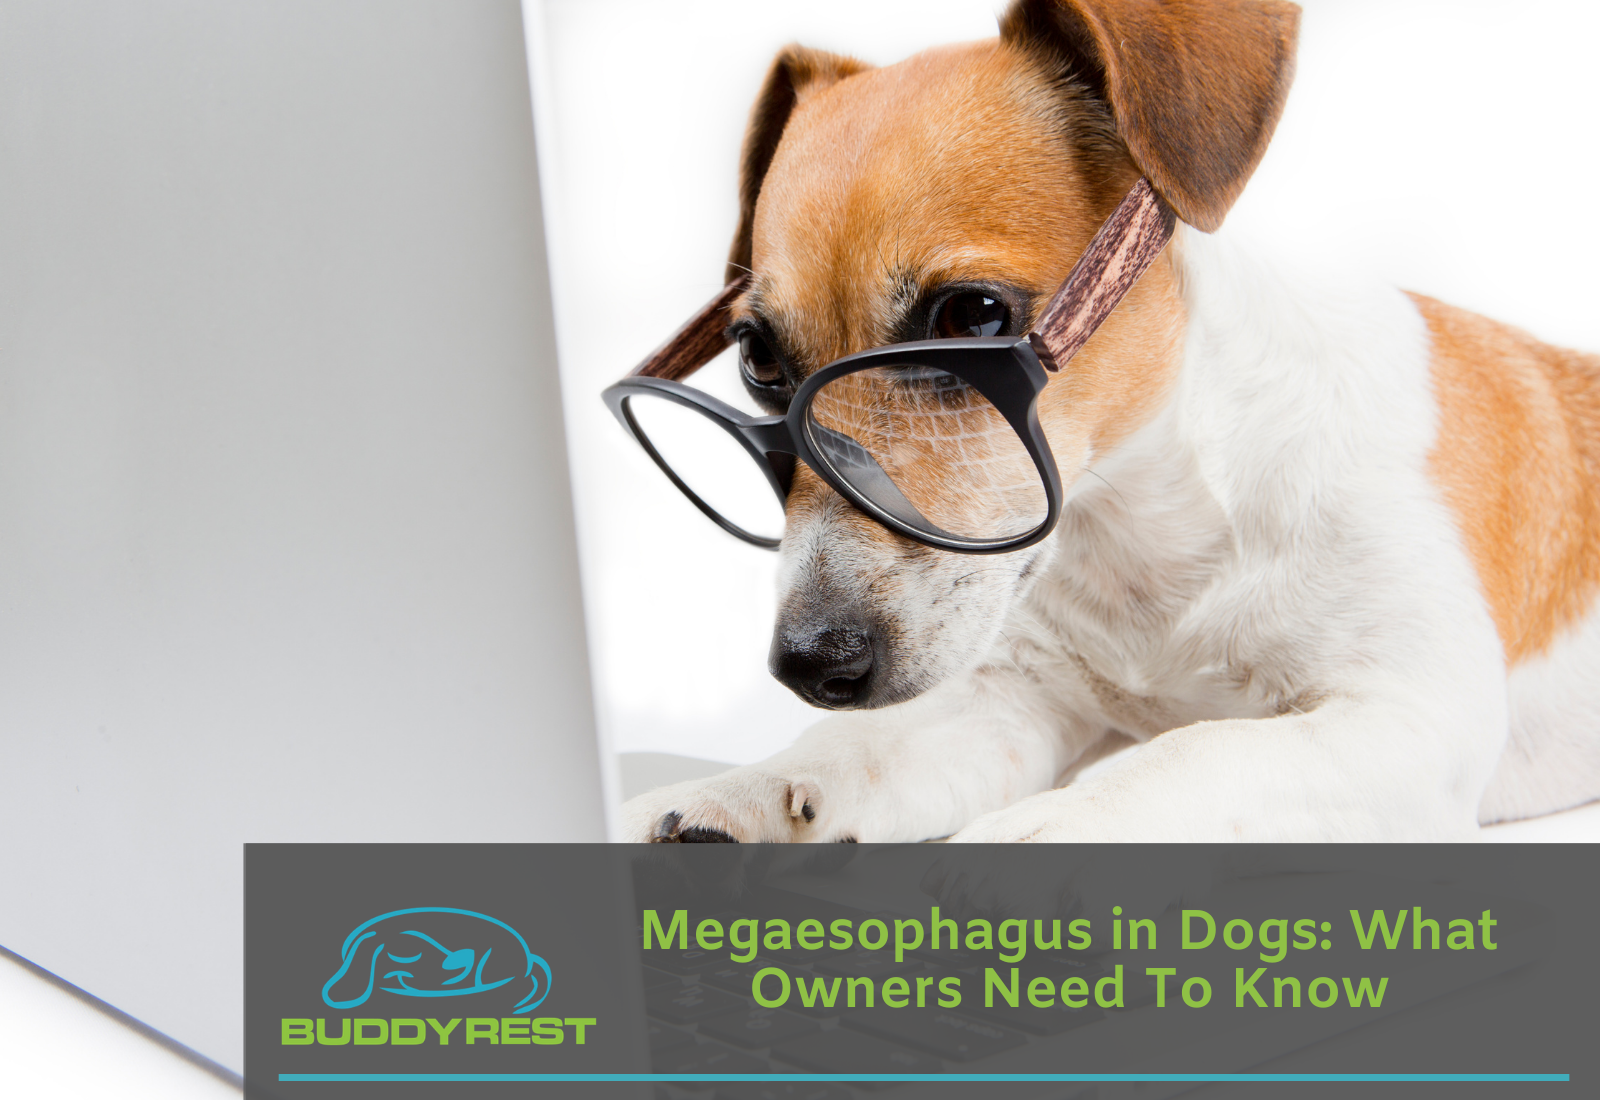 is megaesophagus common in dogs